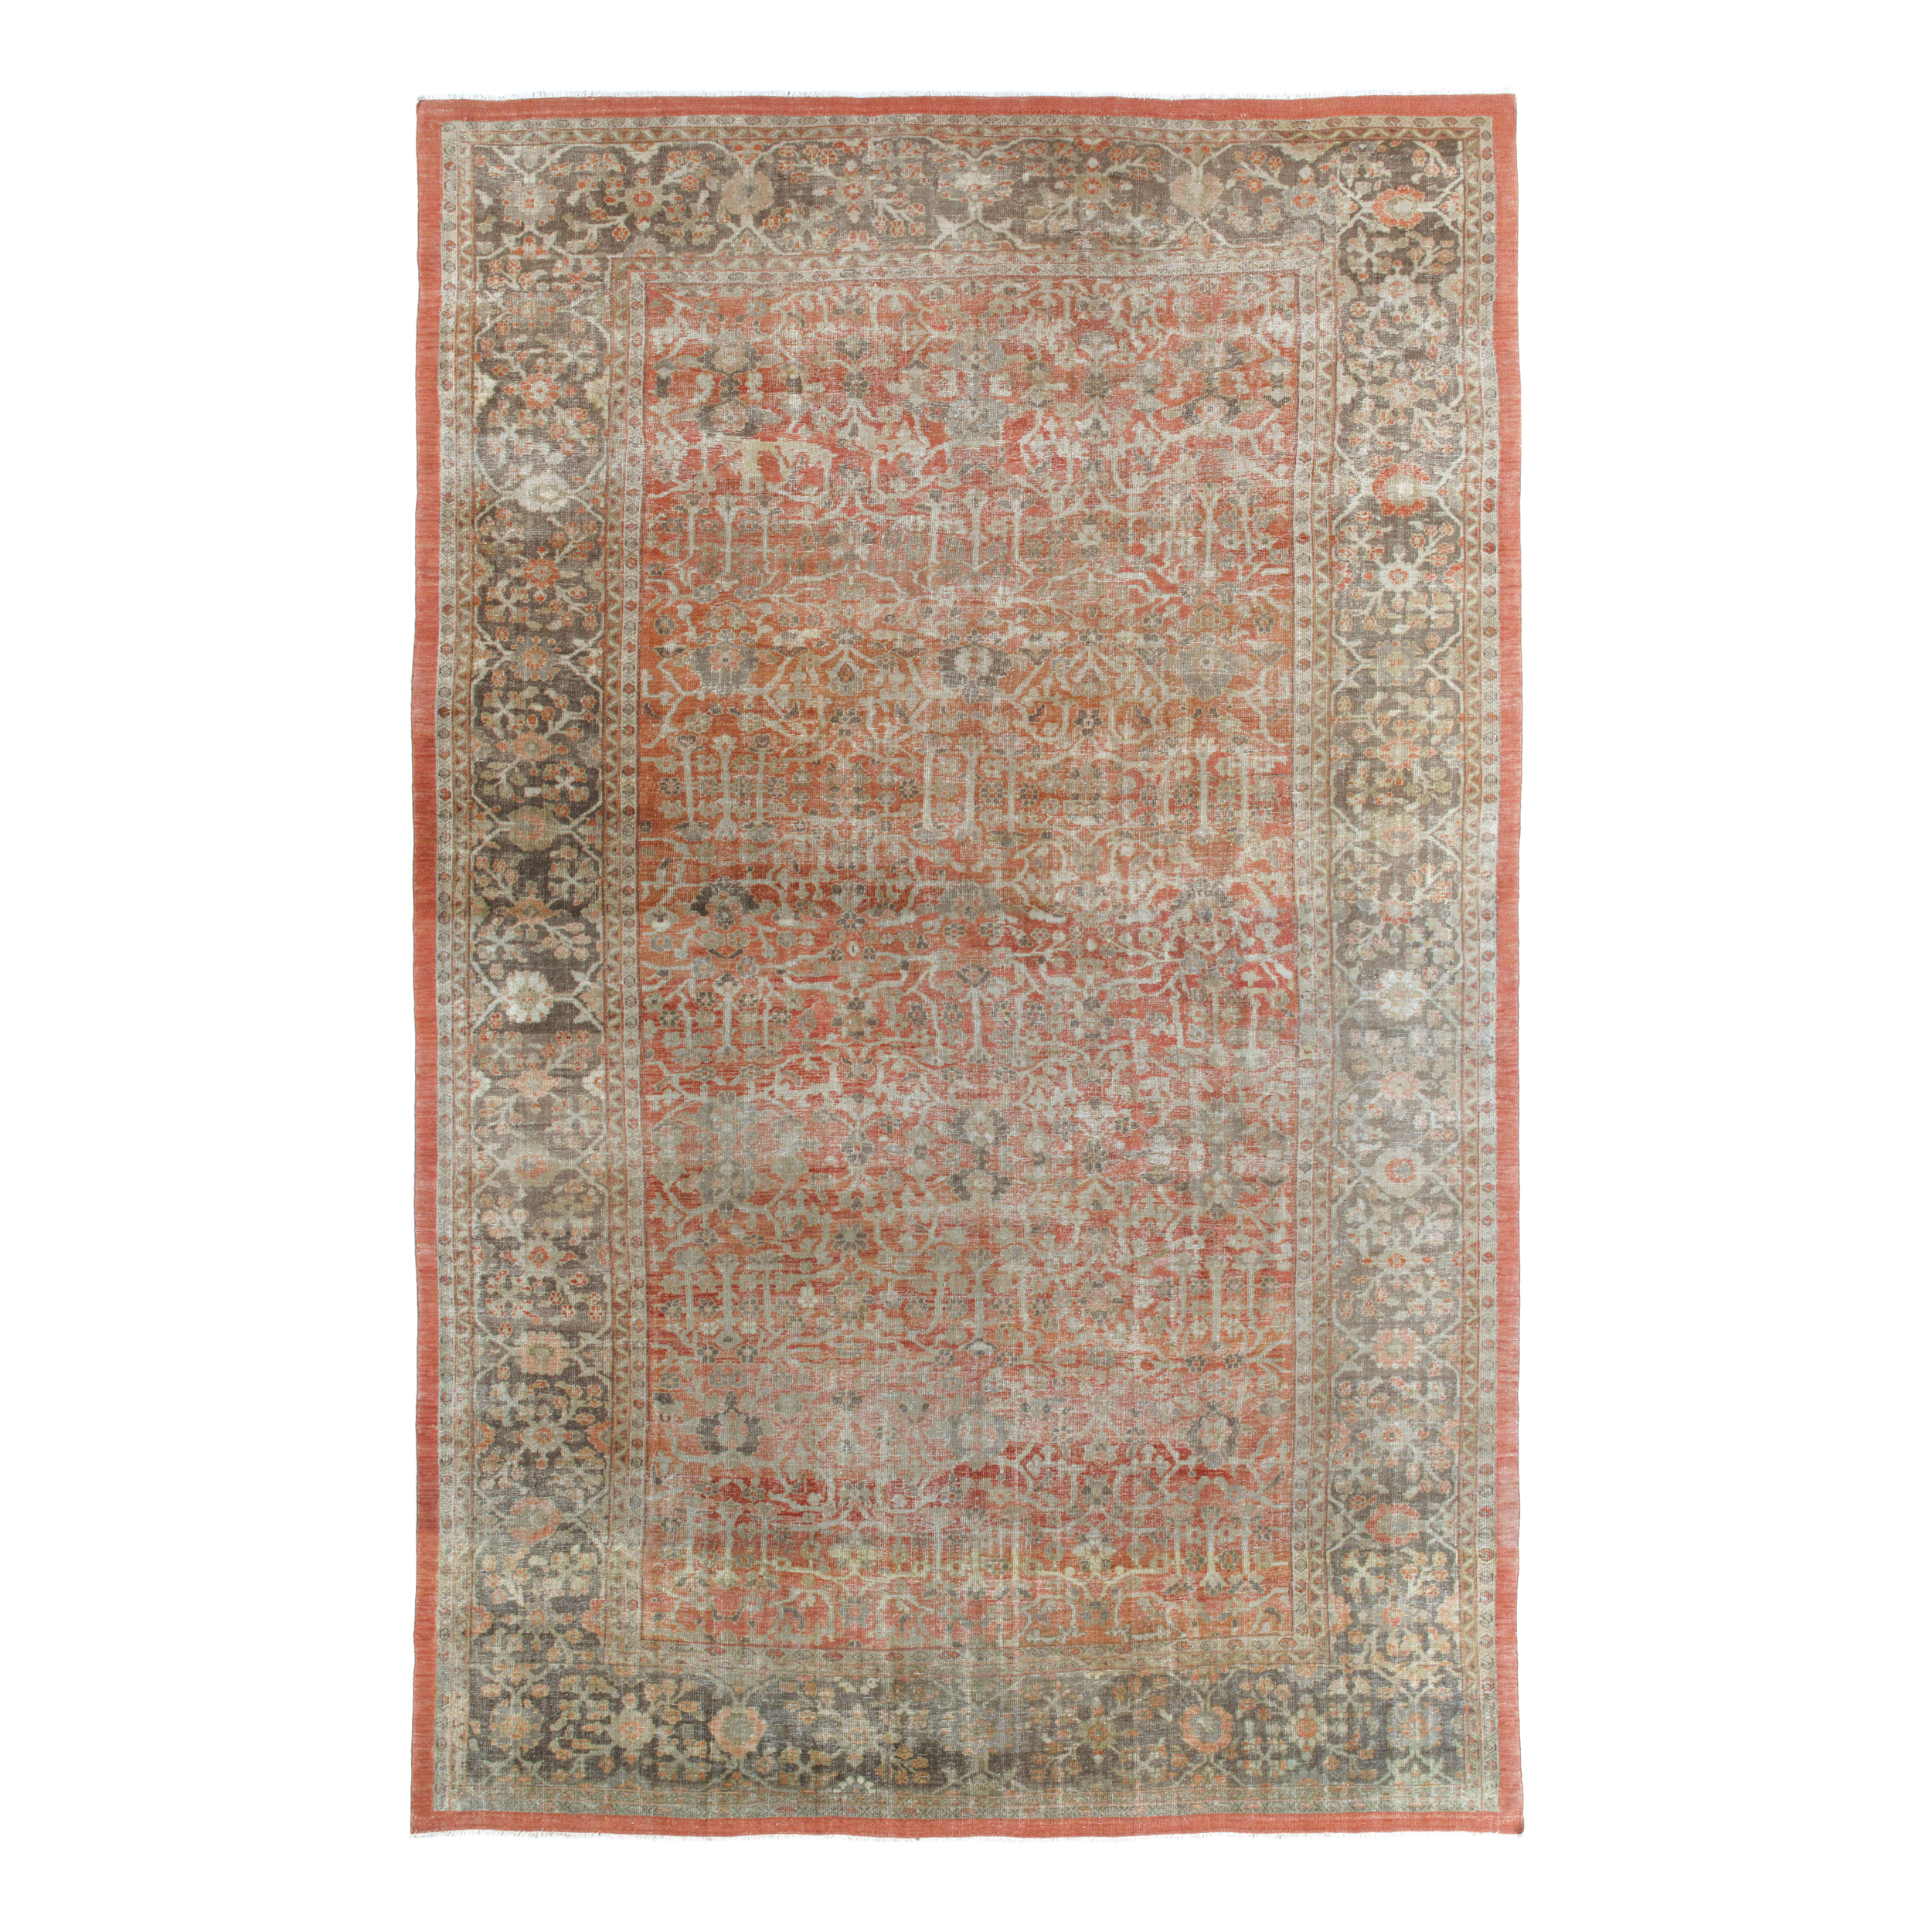 Sultanabad rug is hand-knotted and made of 100% wool.